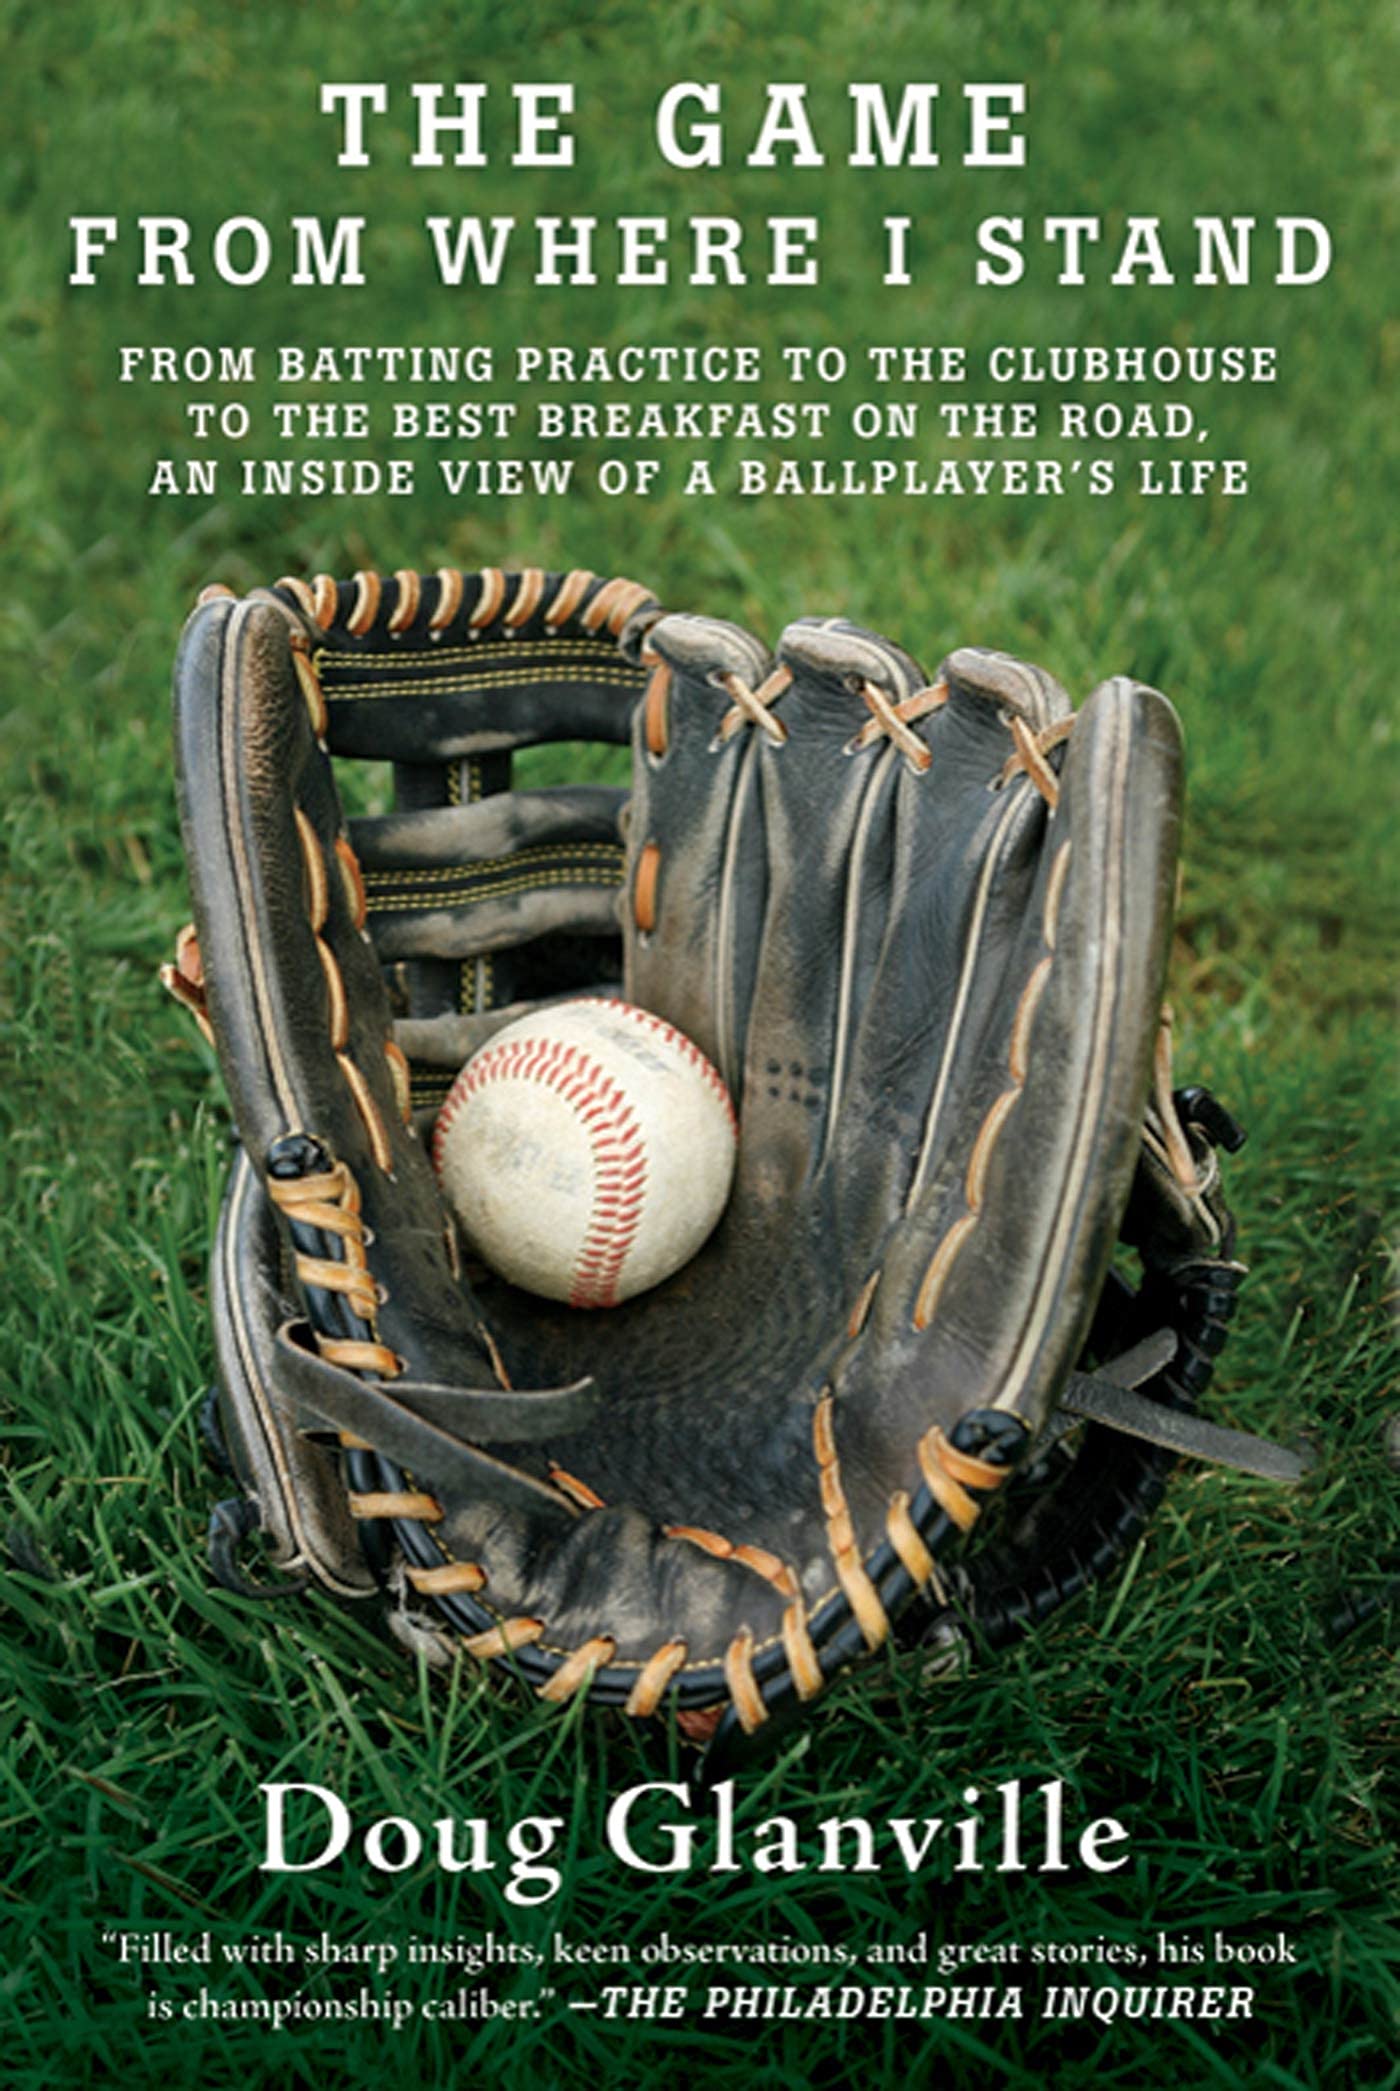 cover of book by Doug Glanville featuring a baseball in a worn baseball glove on the grass